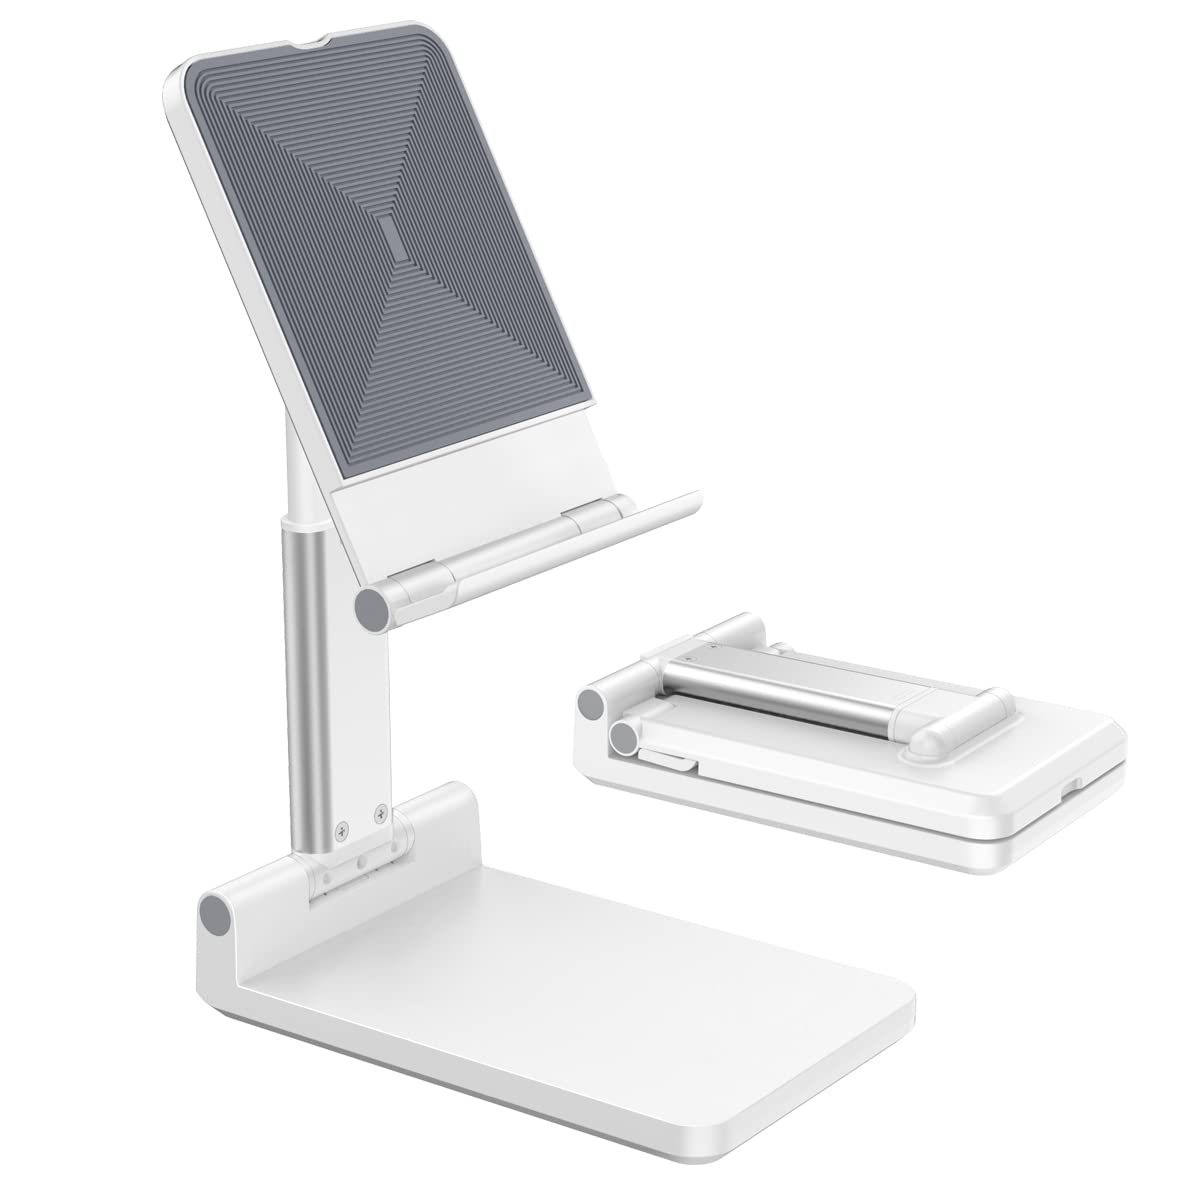 Laza ABS Plastic Mobile Stand in White by Urban Kings Store